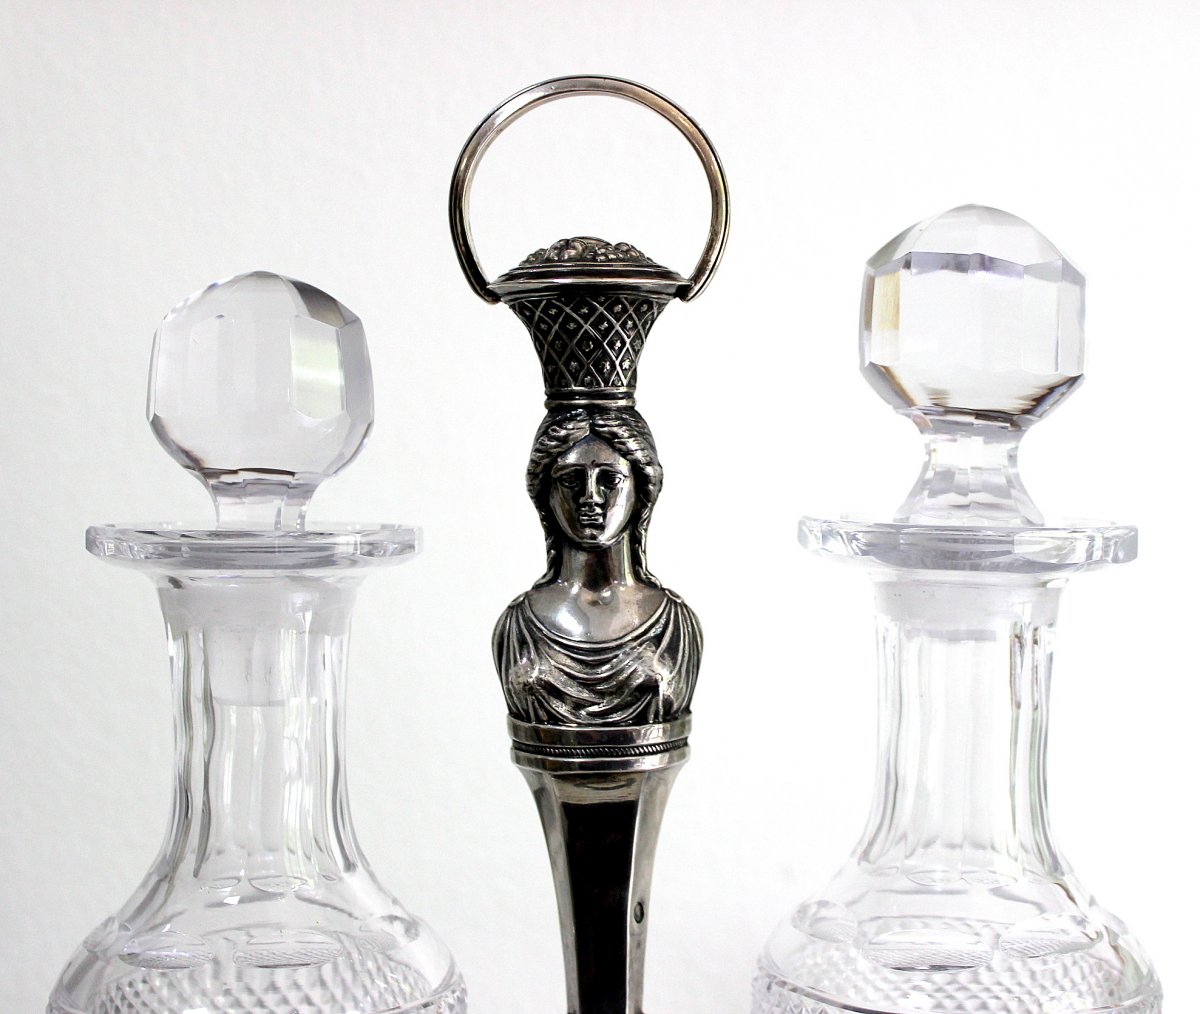 Empire Menage In Silver And Cut Glass For Oil And Vinegar, France Around 1800-photo-2